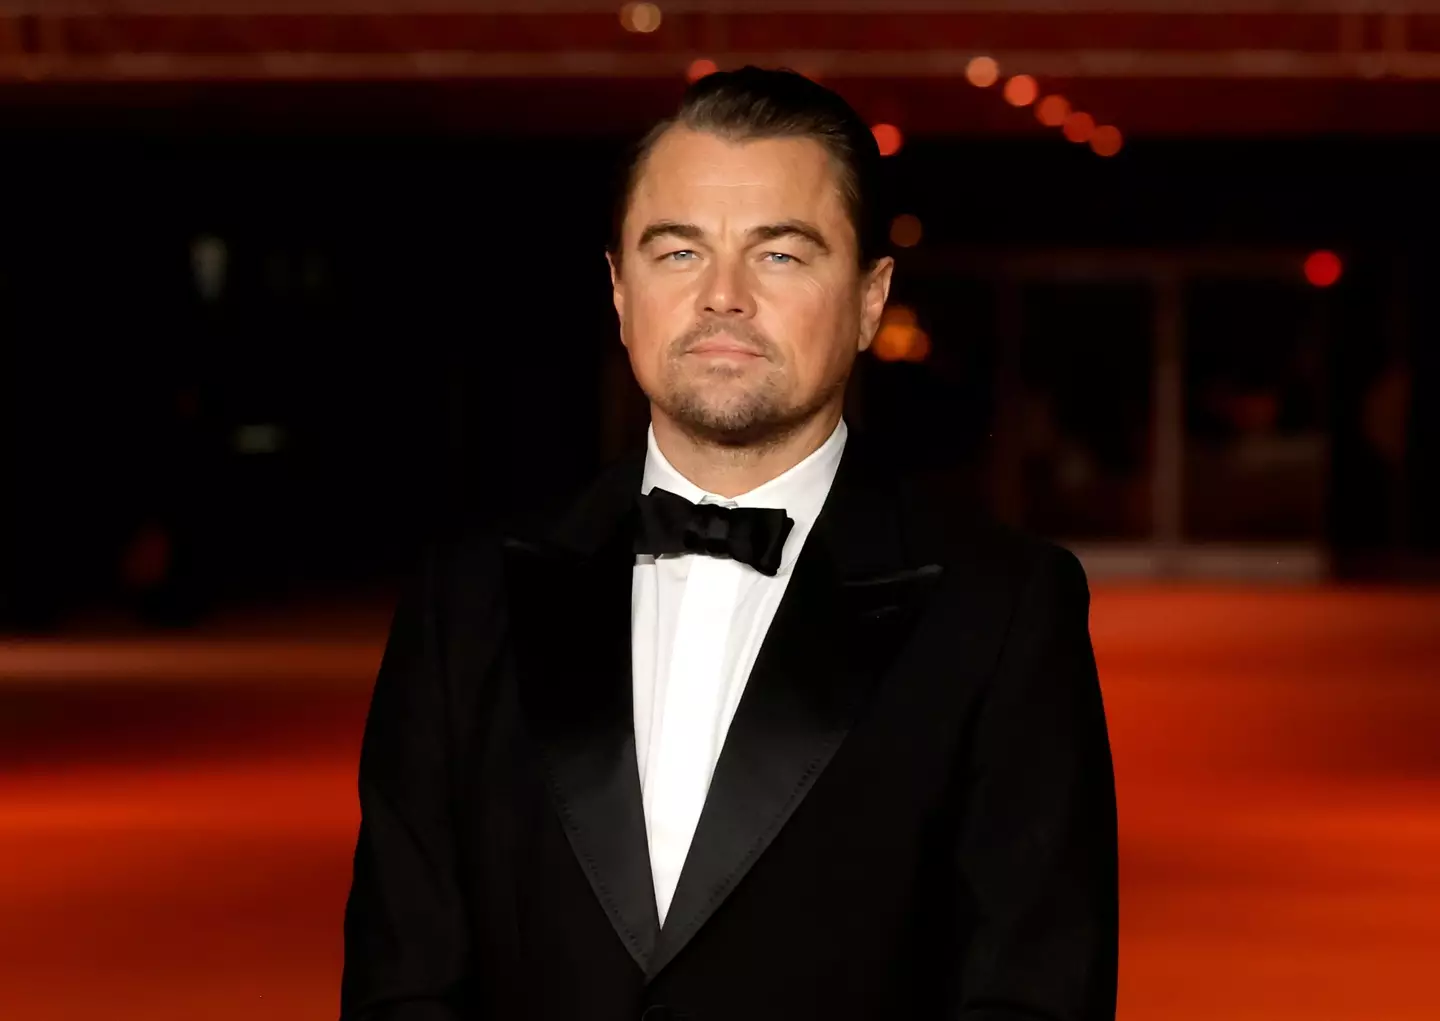 Leonardo DiCaprio has had a number of high-profile relationships.